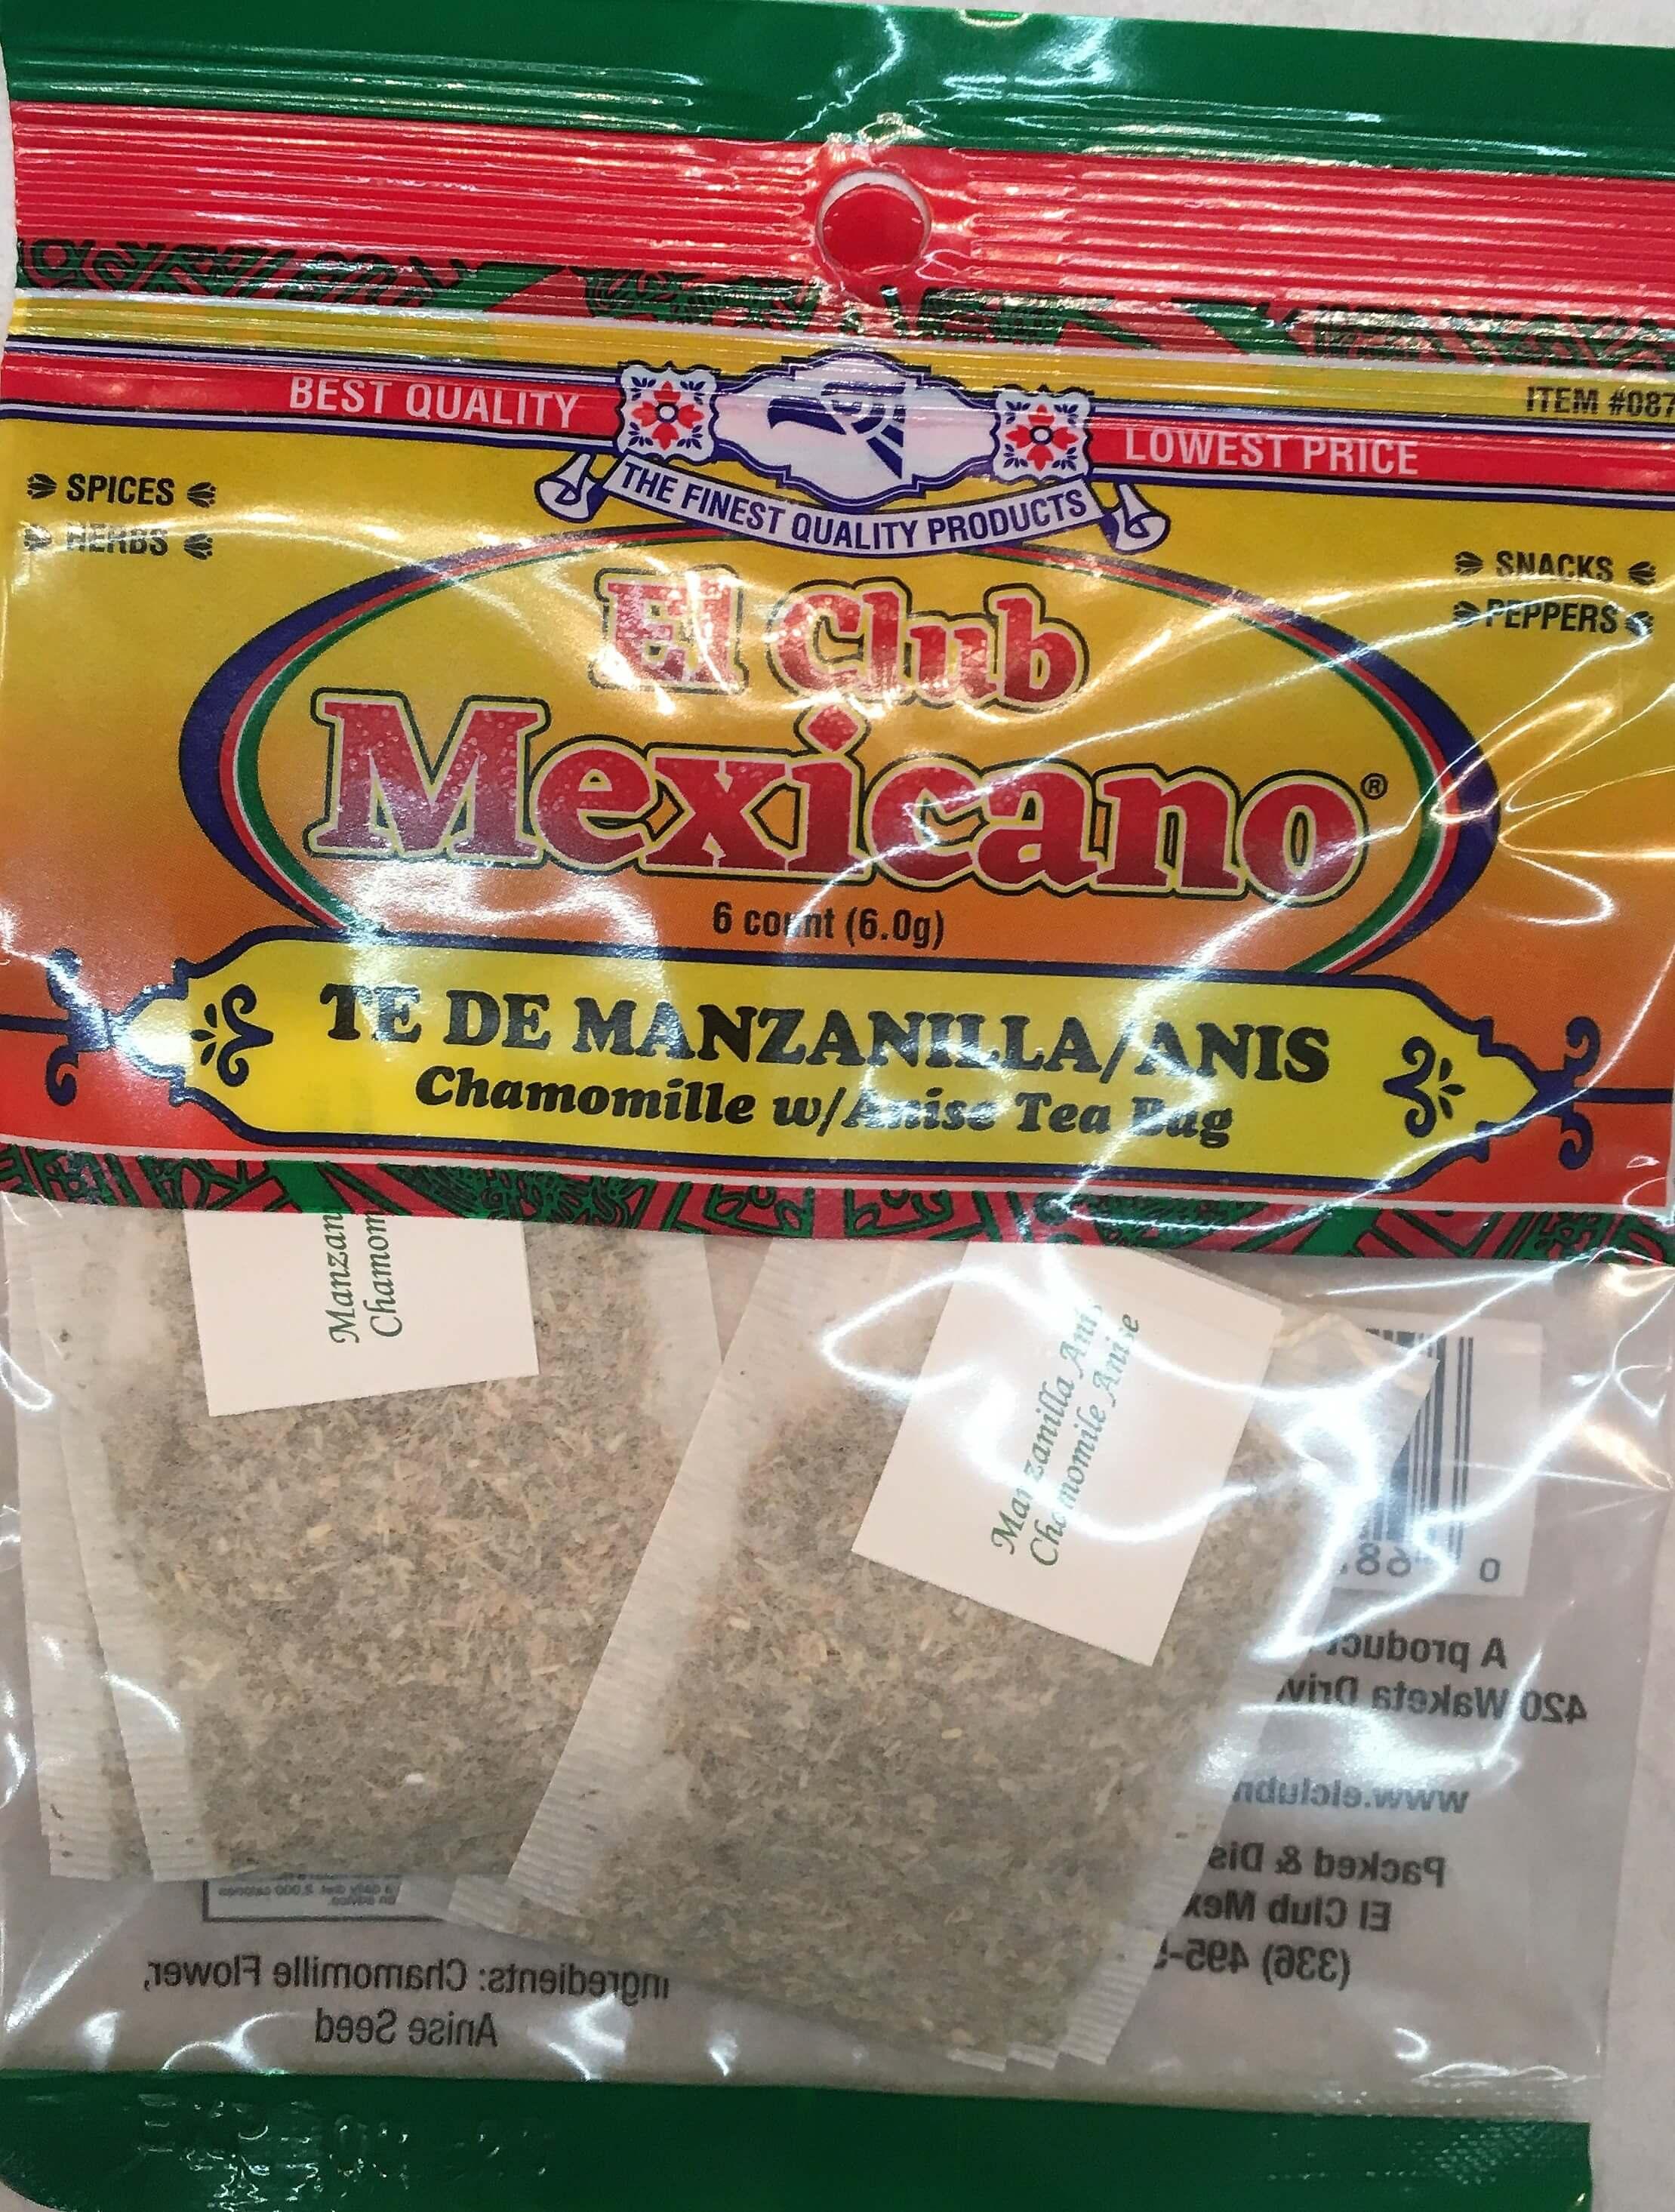 El Club Mexicano - Chamomille w/ Anise Tea Bag 6 count.